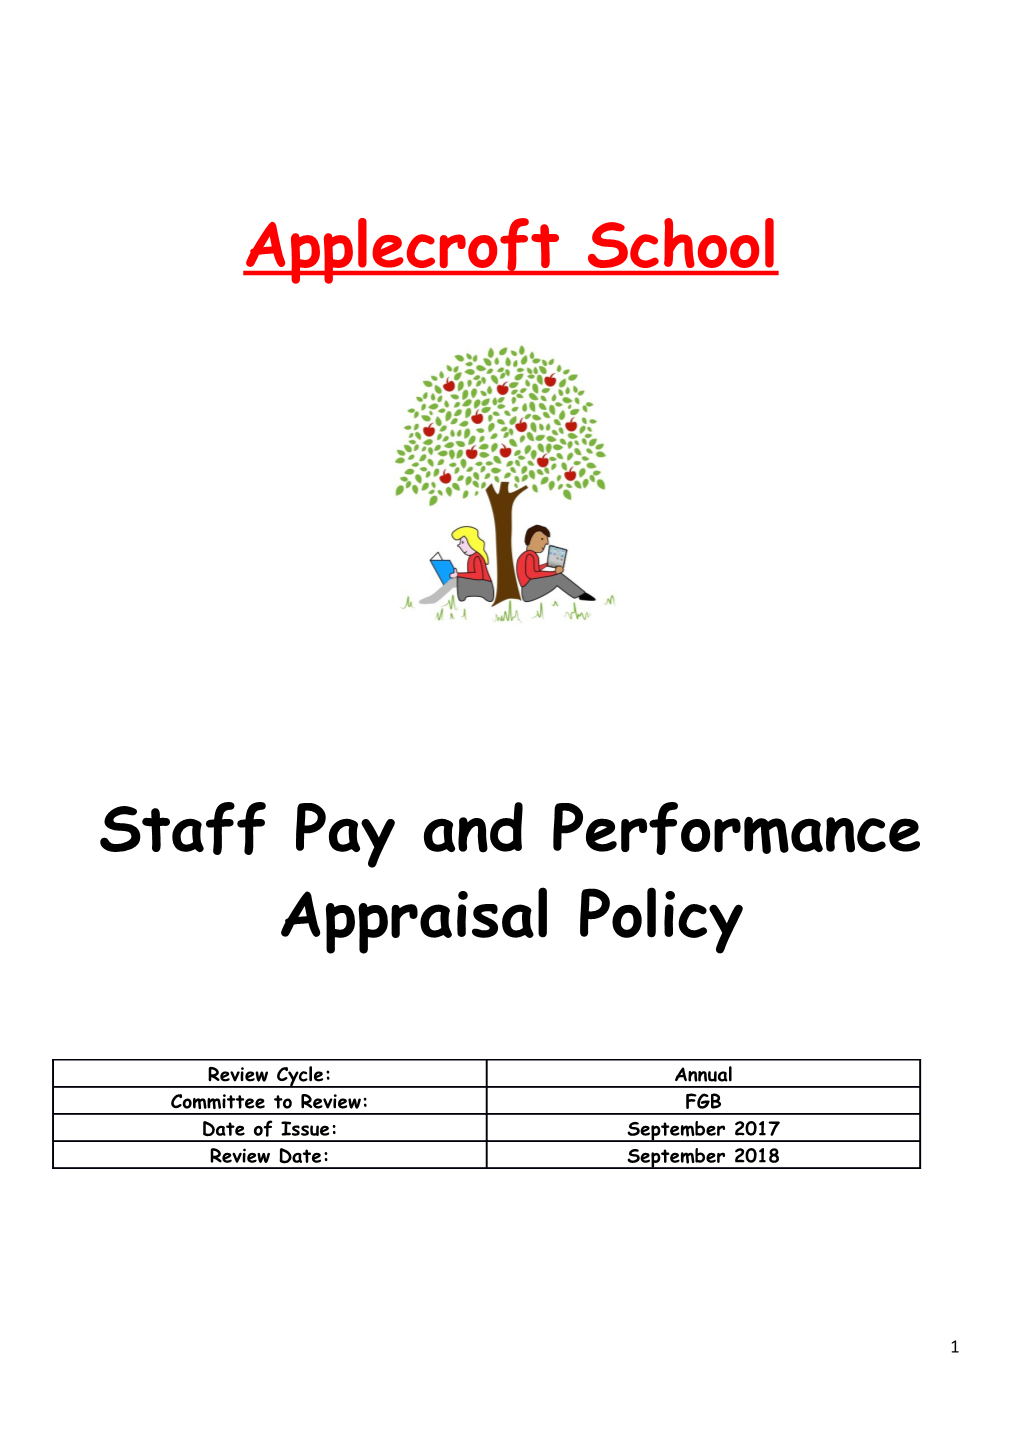 Staff Pay and Performance Appraisal Policy